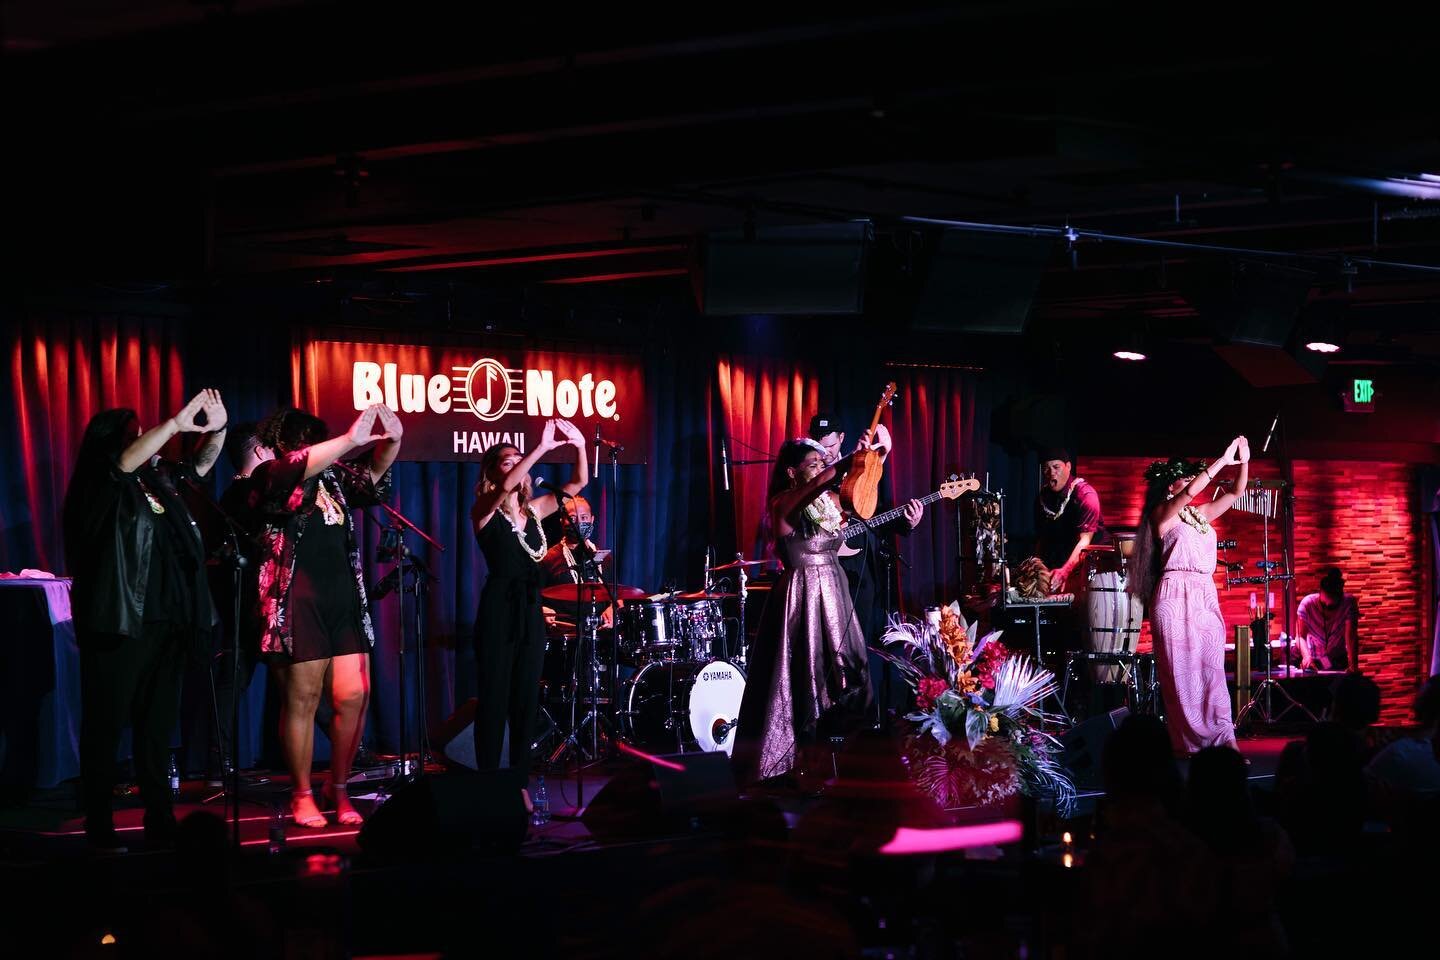 What a night😅I had a blast celebrating my birthday with all of you @bluenotehawaii and can&rsquo;t wait to do it again tonight! 

The shows are Sold Out but you can still grab tickets for the livestream tonight at 6:30pm at bluenoteHawaii.com link i